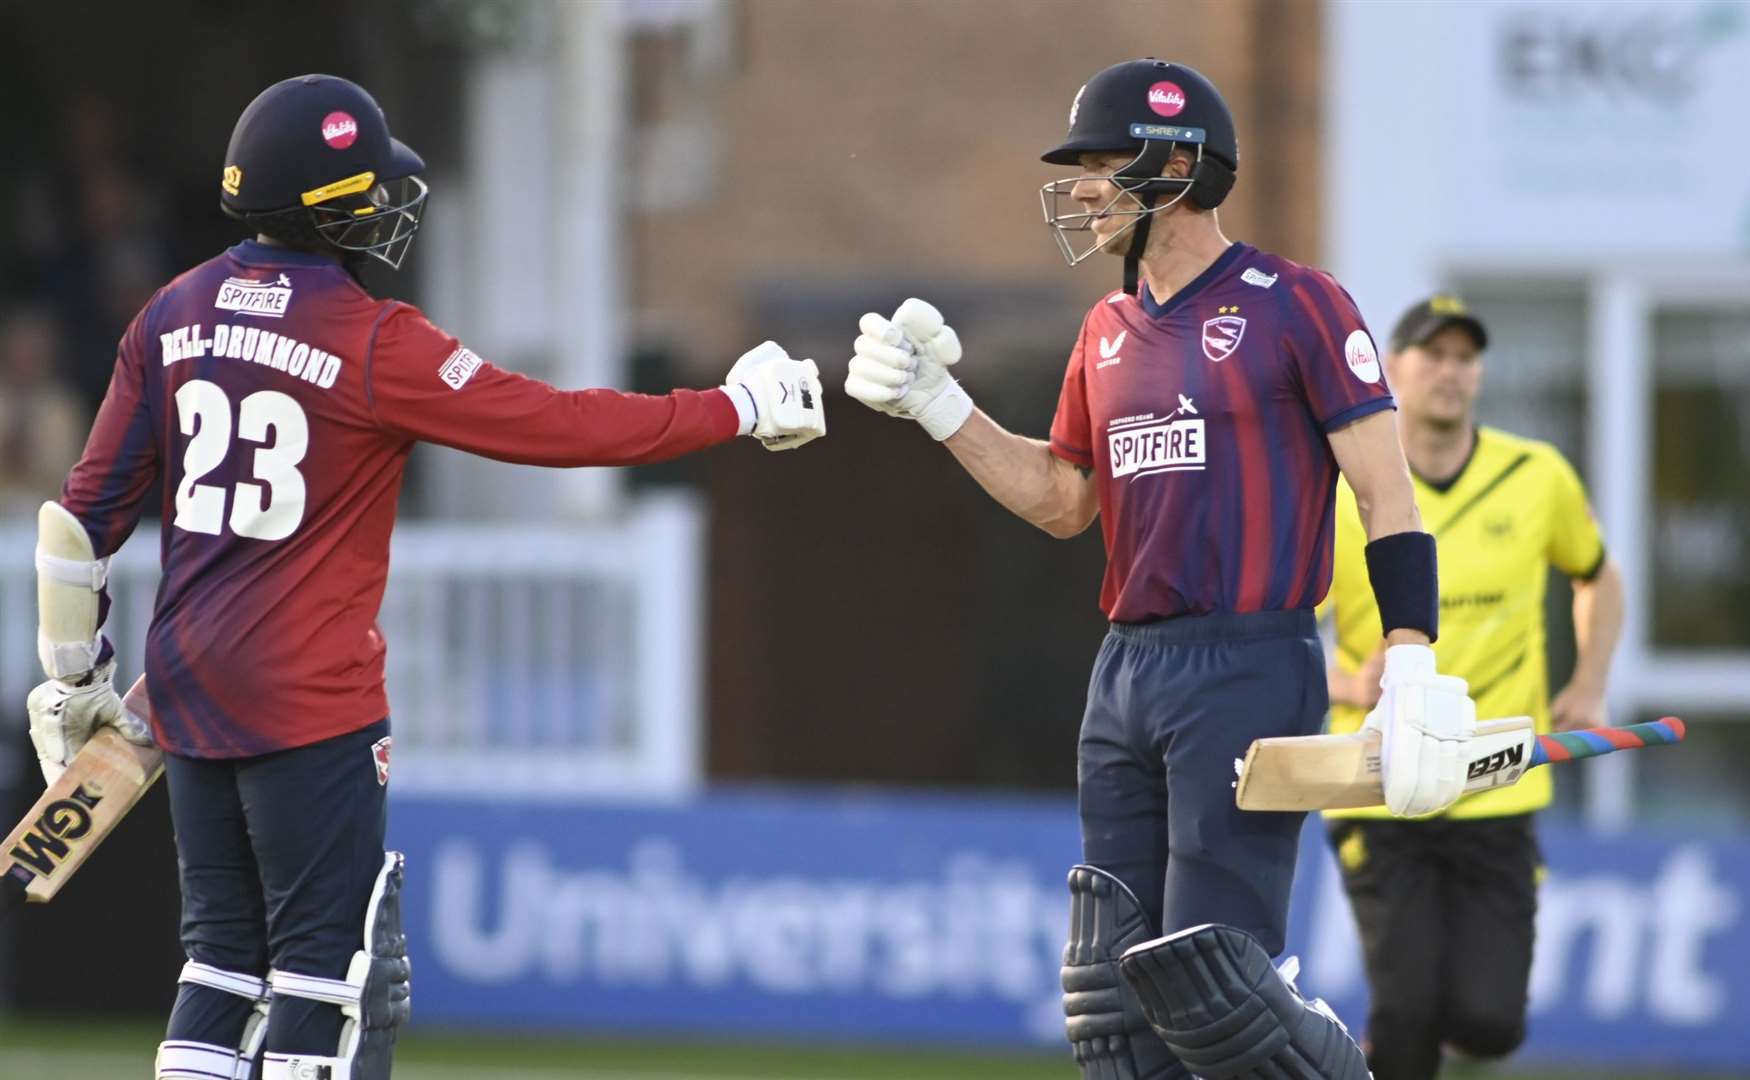 Daniel Bell-Drummond and Joe Denly at the crease together. Picture: Barry Goodwin